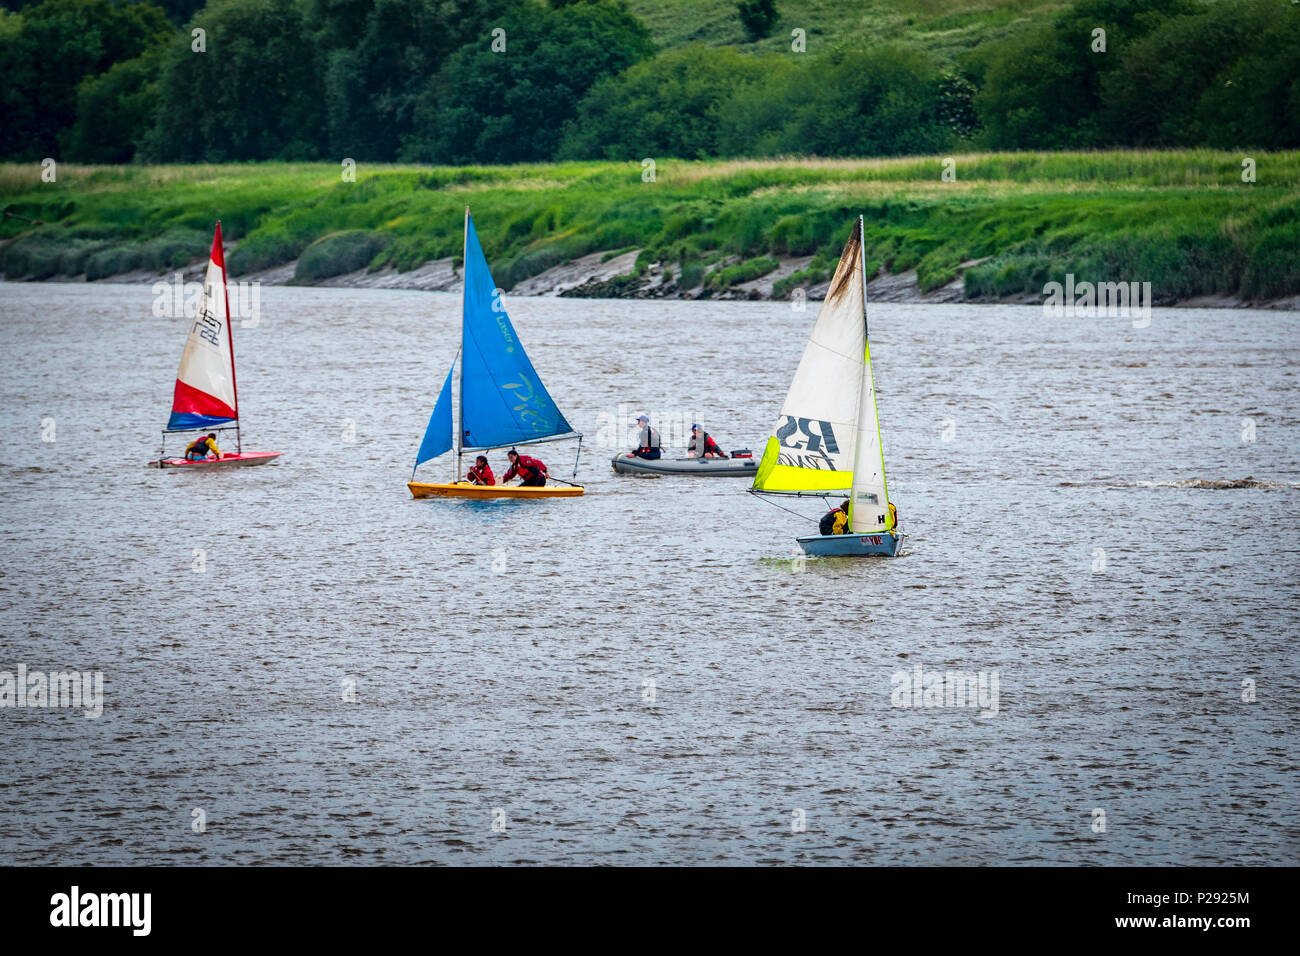 Dinghy sailing on the river Mersey at Fiddlers Ferry, Penketh. Stock Photo